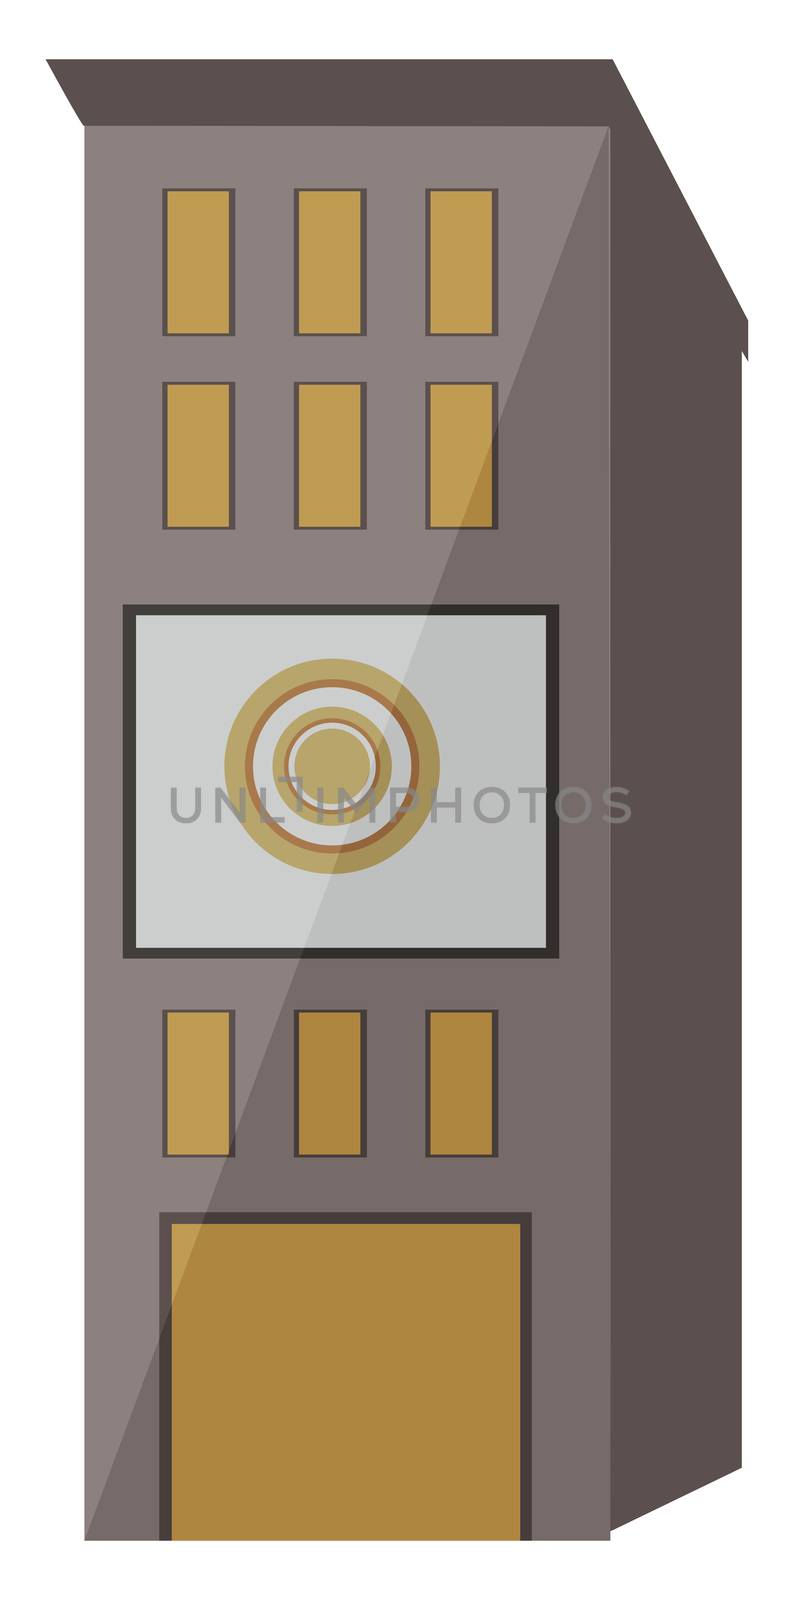 Tall building, illustration, vector on white background